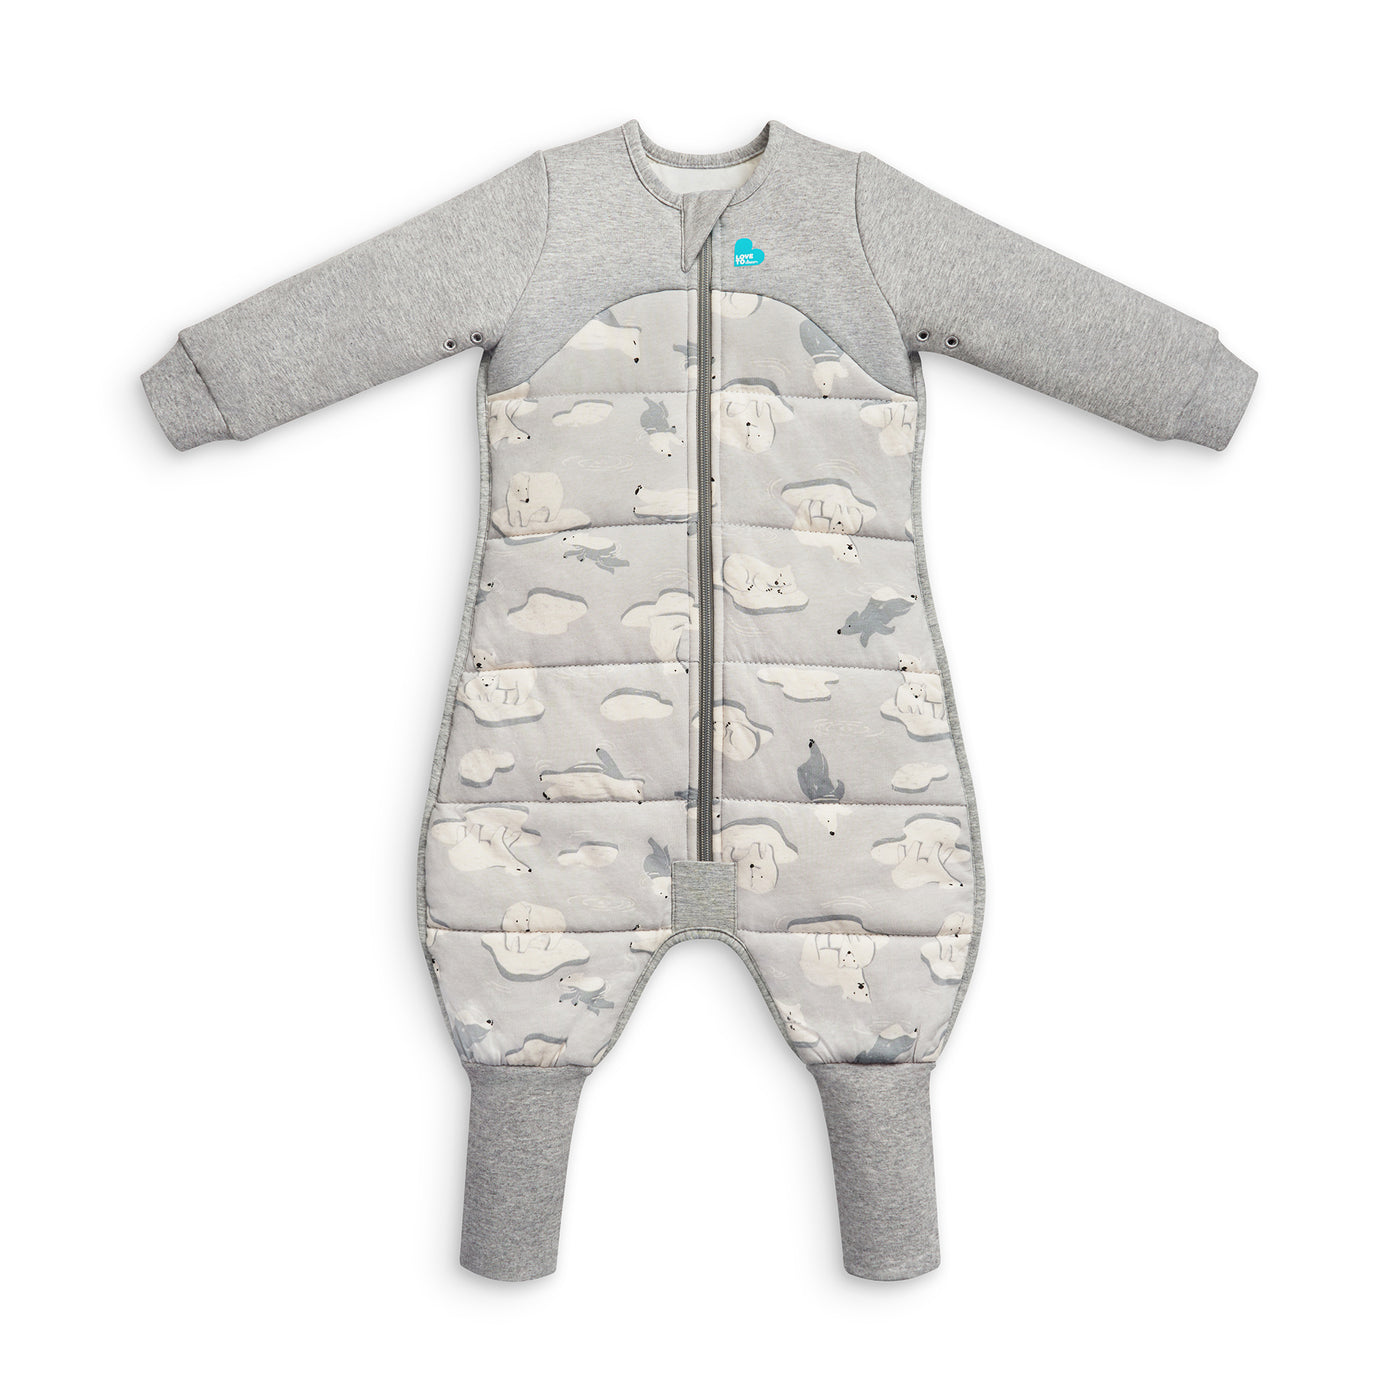 Sleep Suit Cold 3.5 TOG - South Pole - Love to Dream™ NZ 